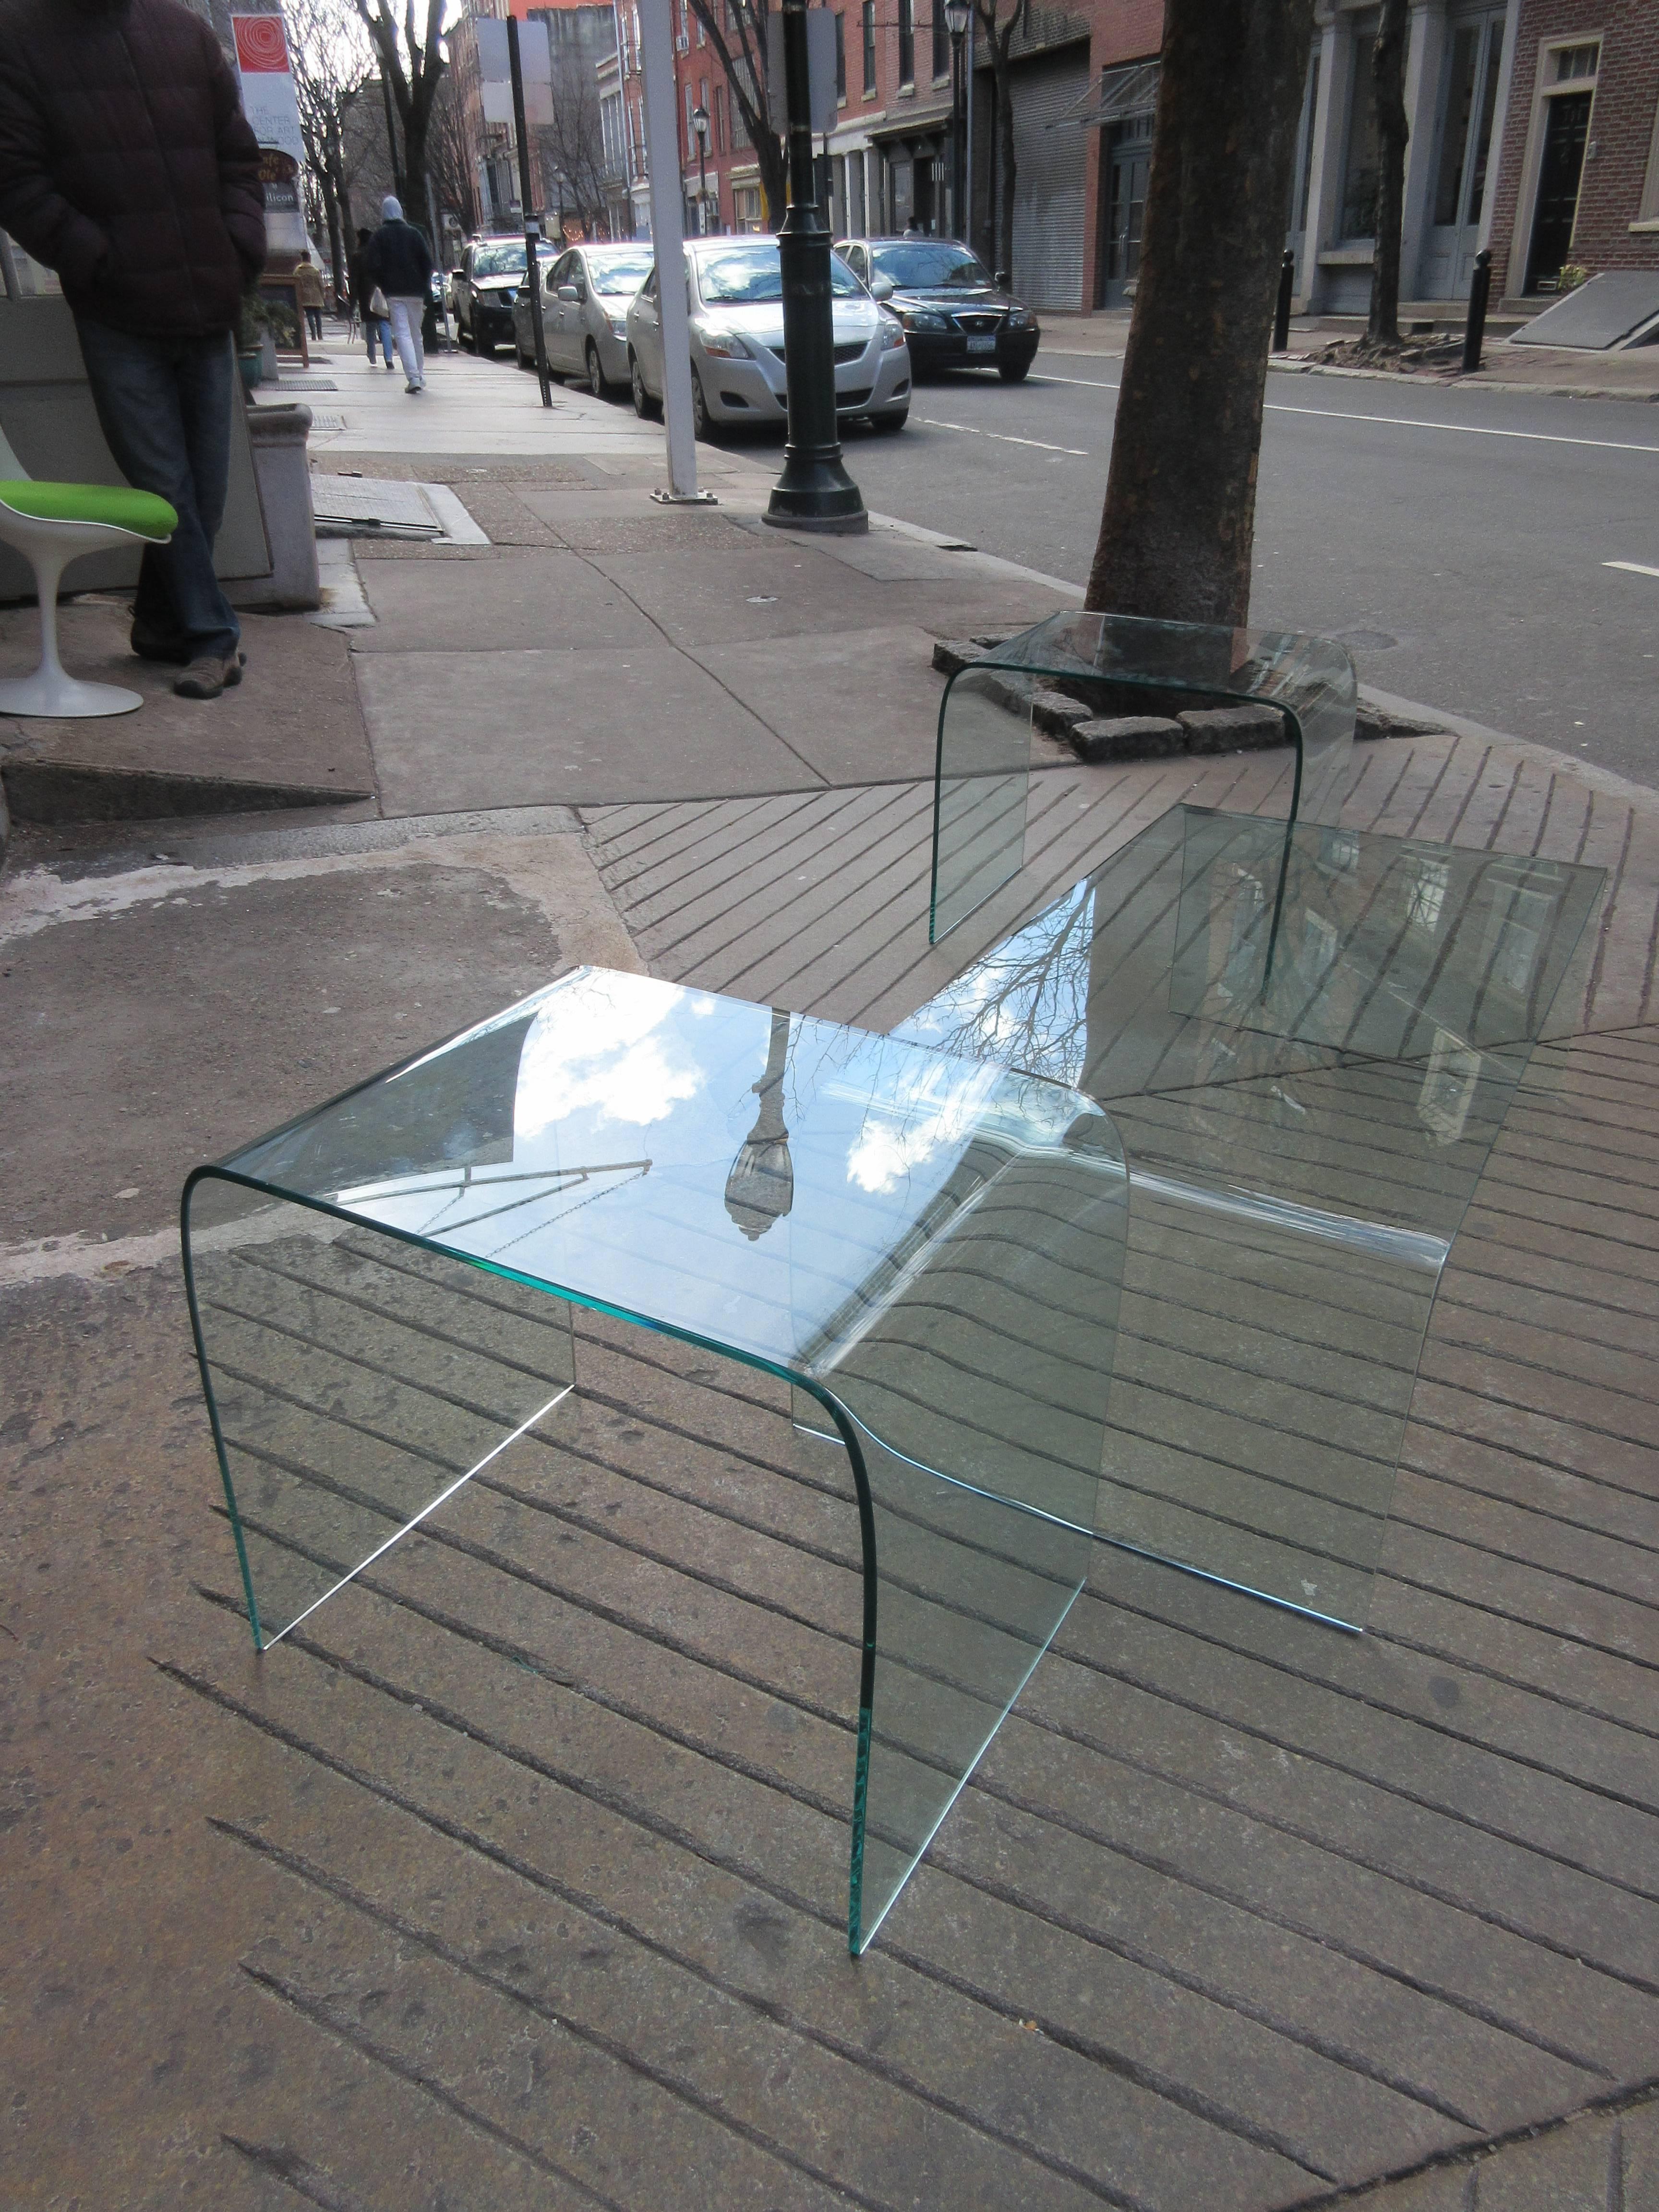 Coffee and matching end tables. We are willing to separate. Waterfall bent glass allows for this one material table to function. Beautiful in its simplicity. End table dimension is 17.75 wide x 23.75 long x 20 high. Coffee dimensions listed below.